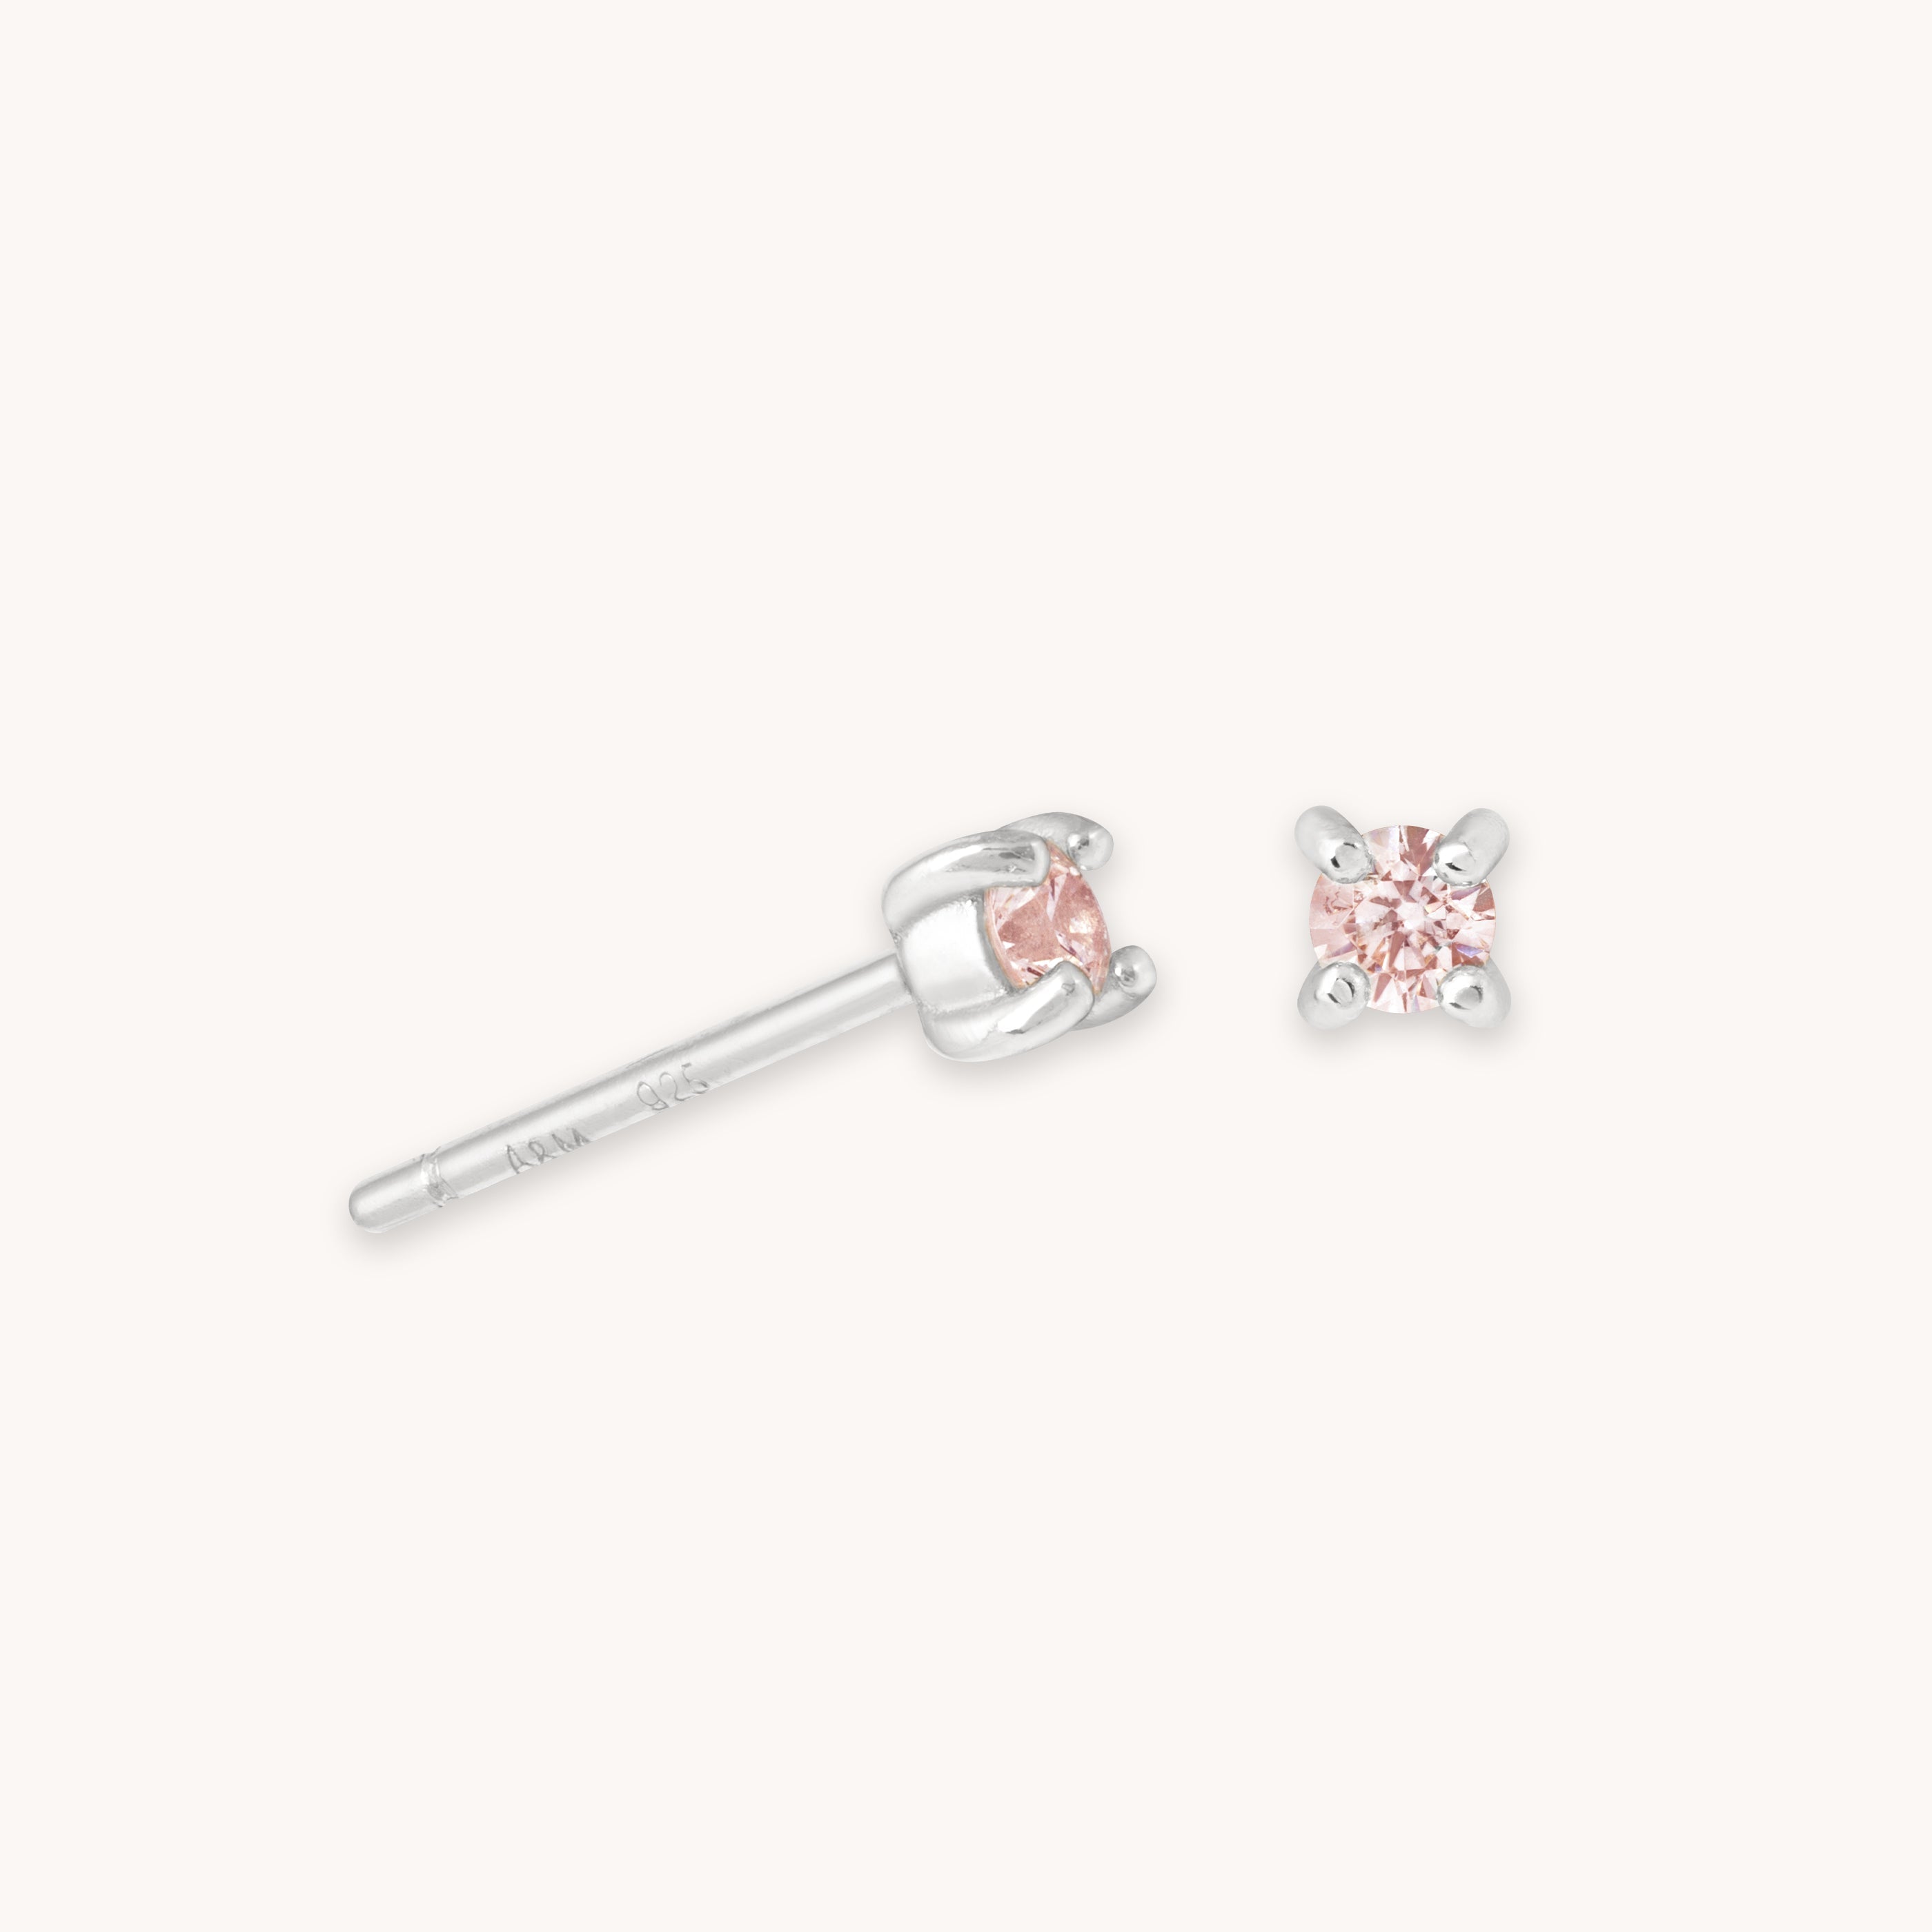 October Birthstone Stud Earrings in Silver with Pink Tourmaline CZ